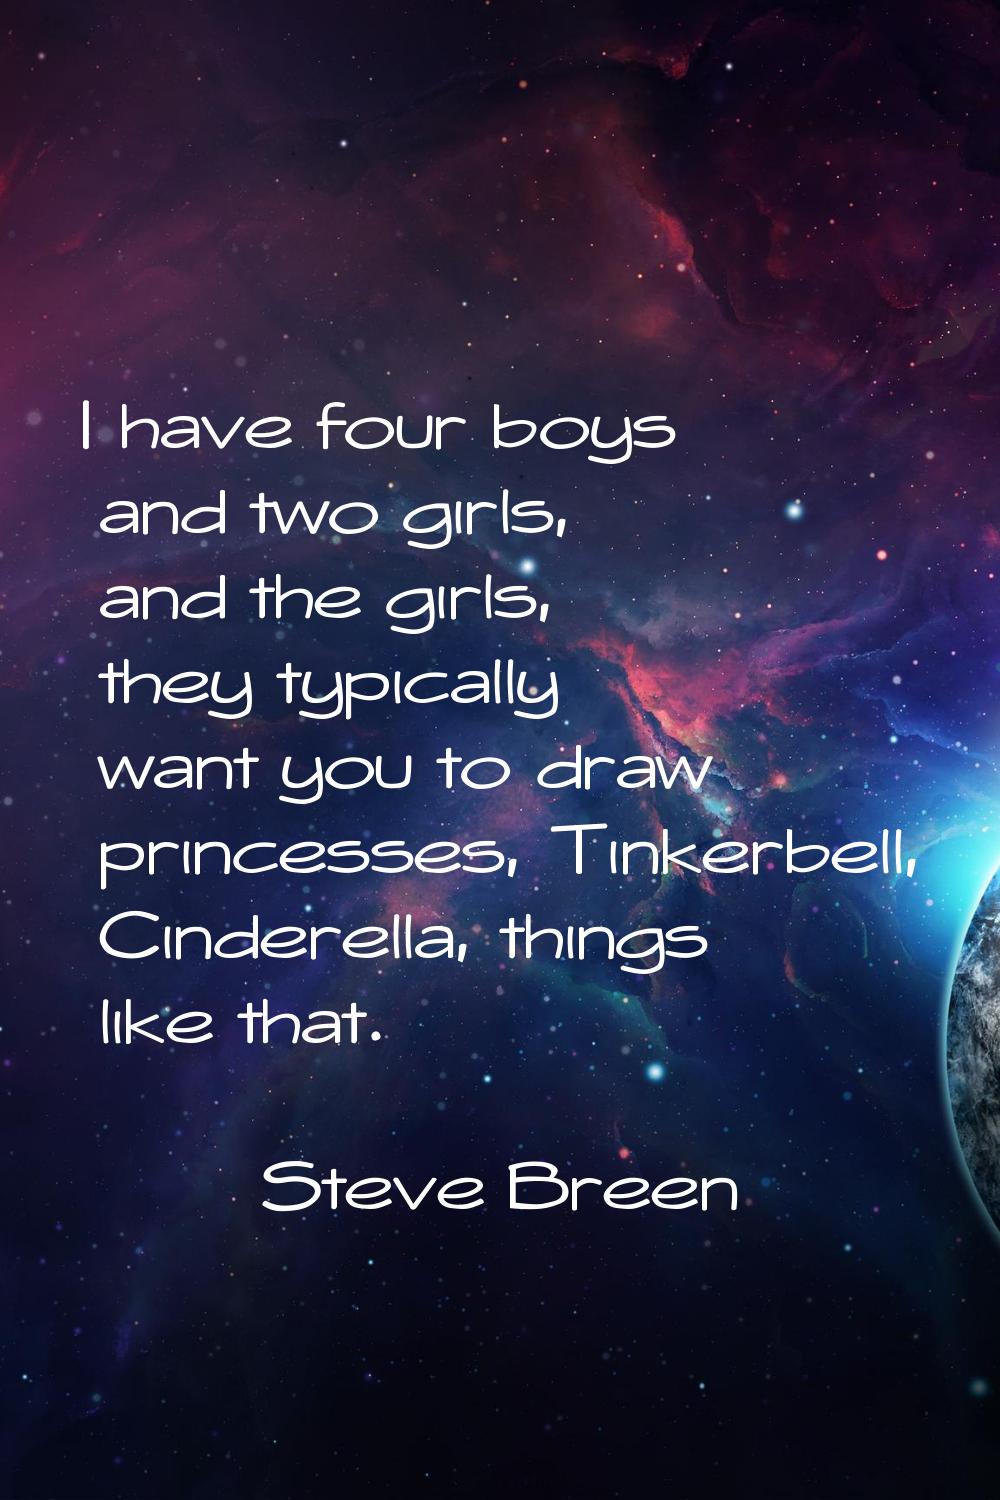 I have four boys and two girls, and the girls, they typically want you to draw princesses, Tinkerbe